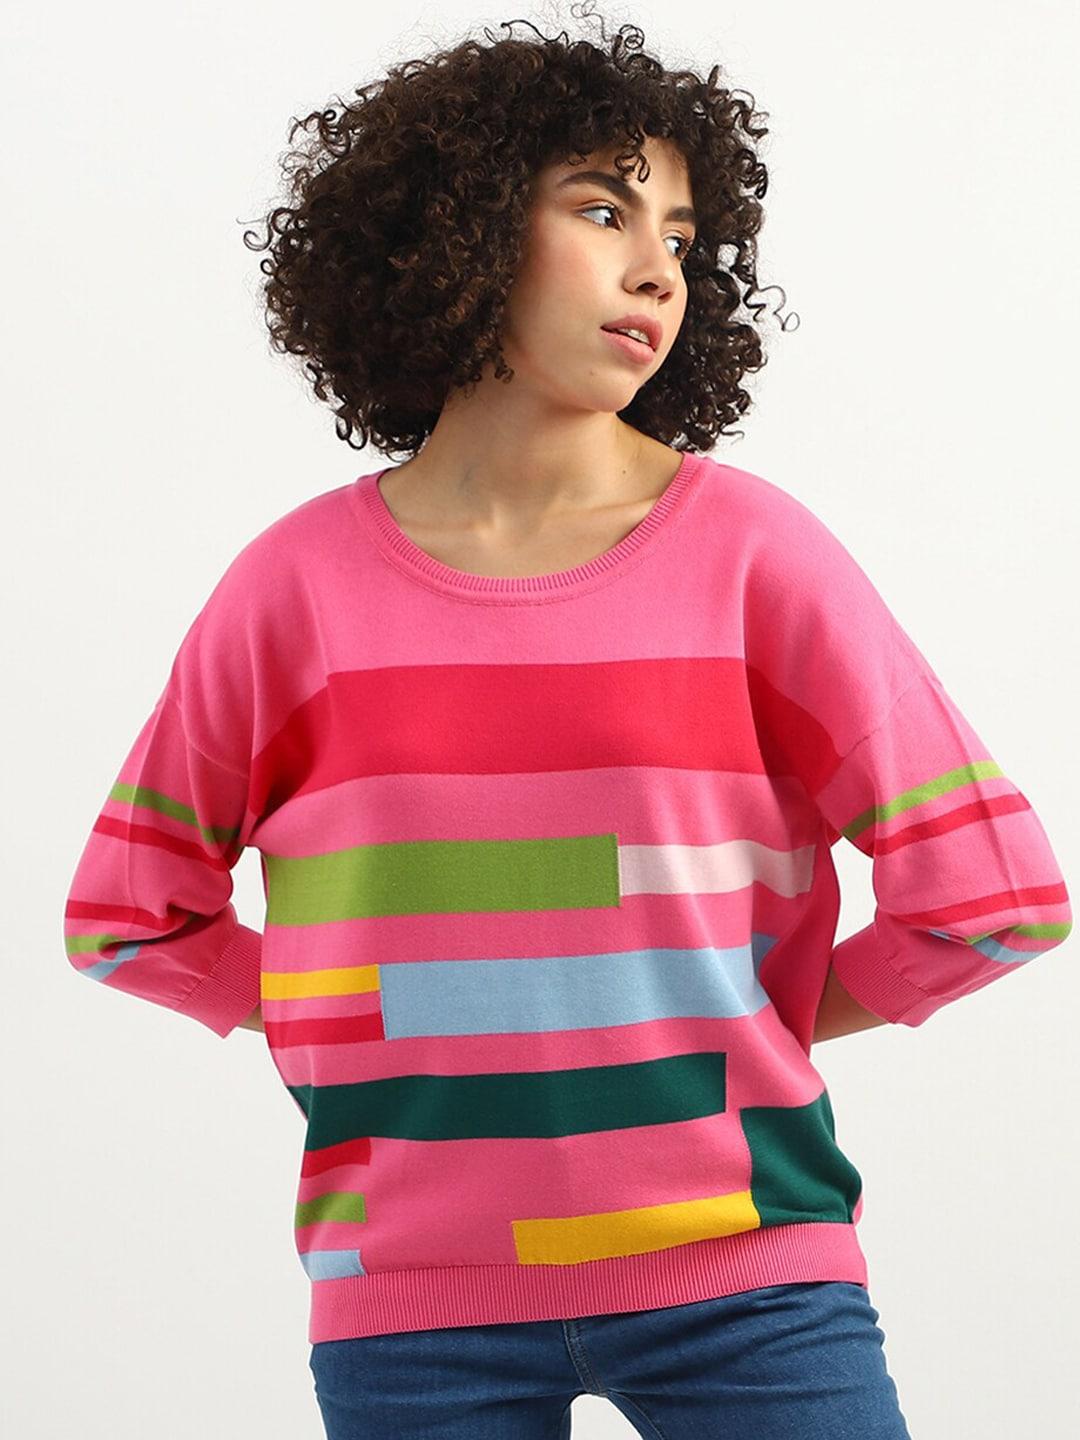 united colors of benetton womenround neck colourblocked cotton pullover sweater